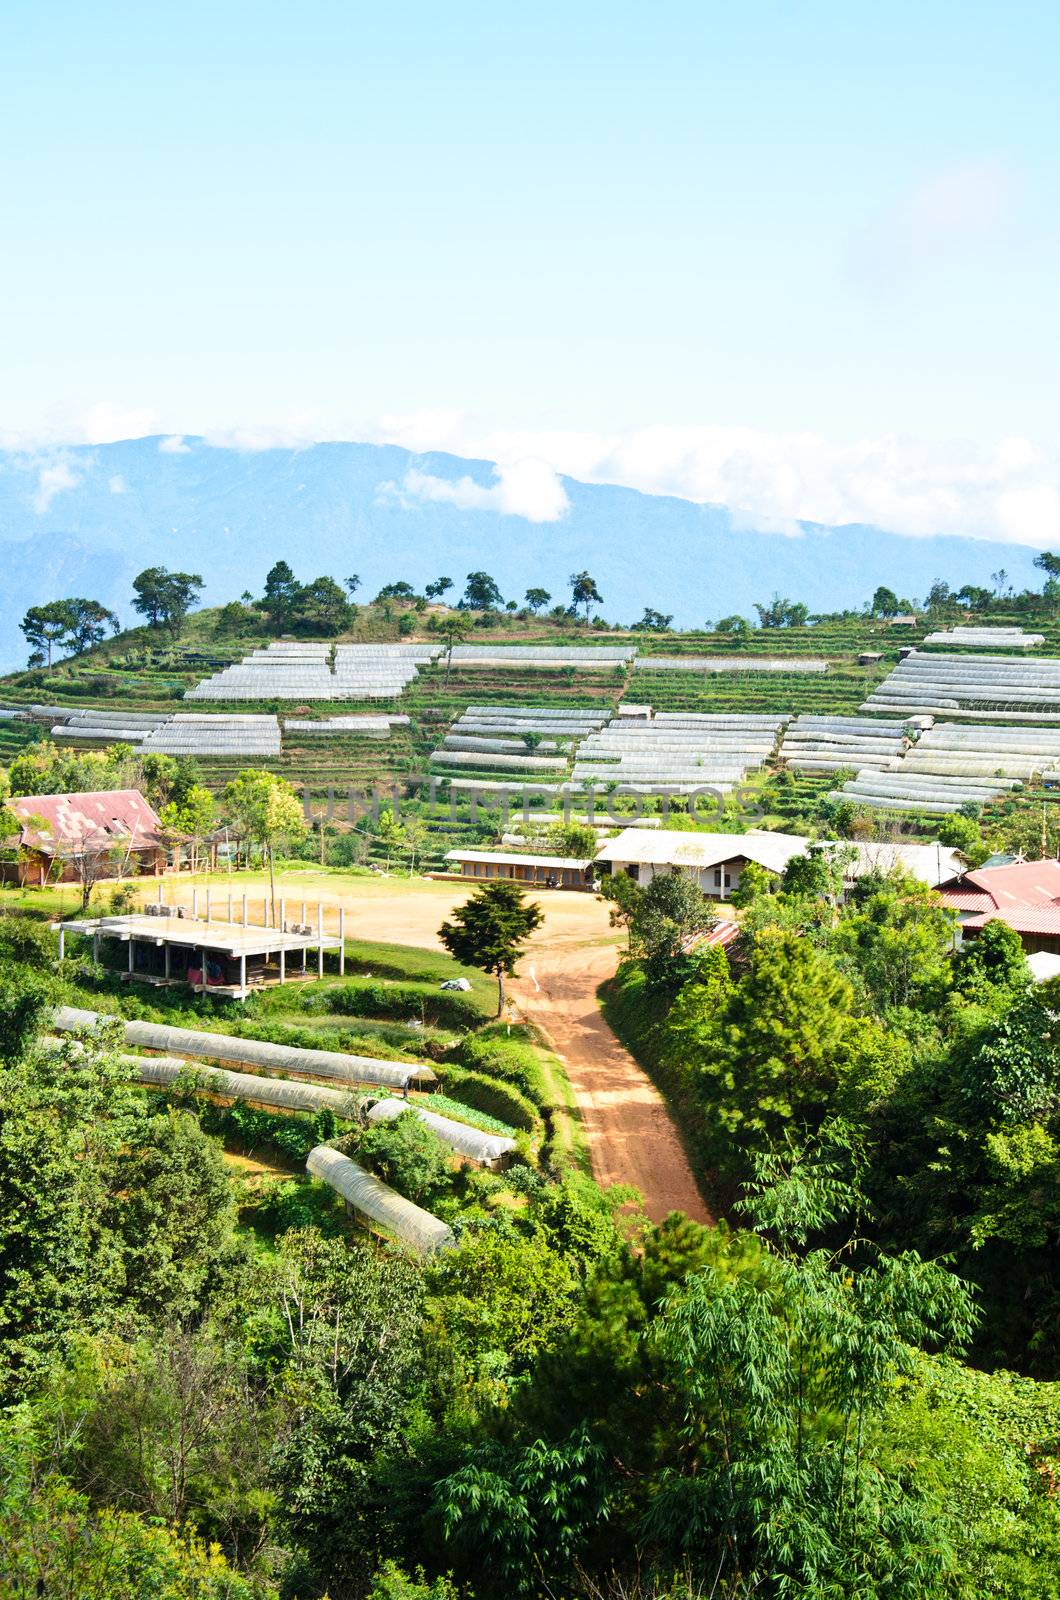 The Gravel road to terraced plant on Mountain, Chiang Mai, Thailand